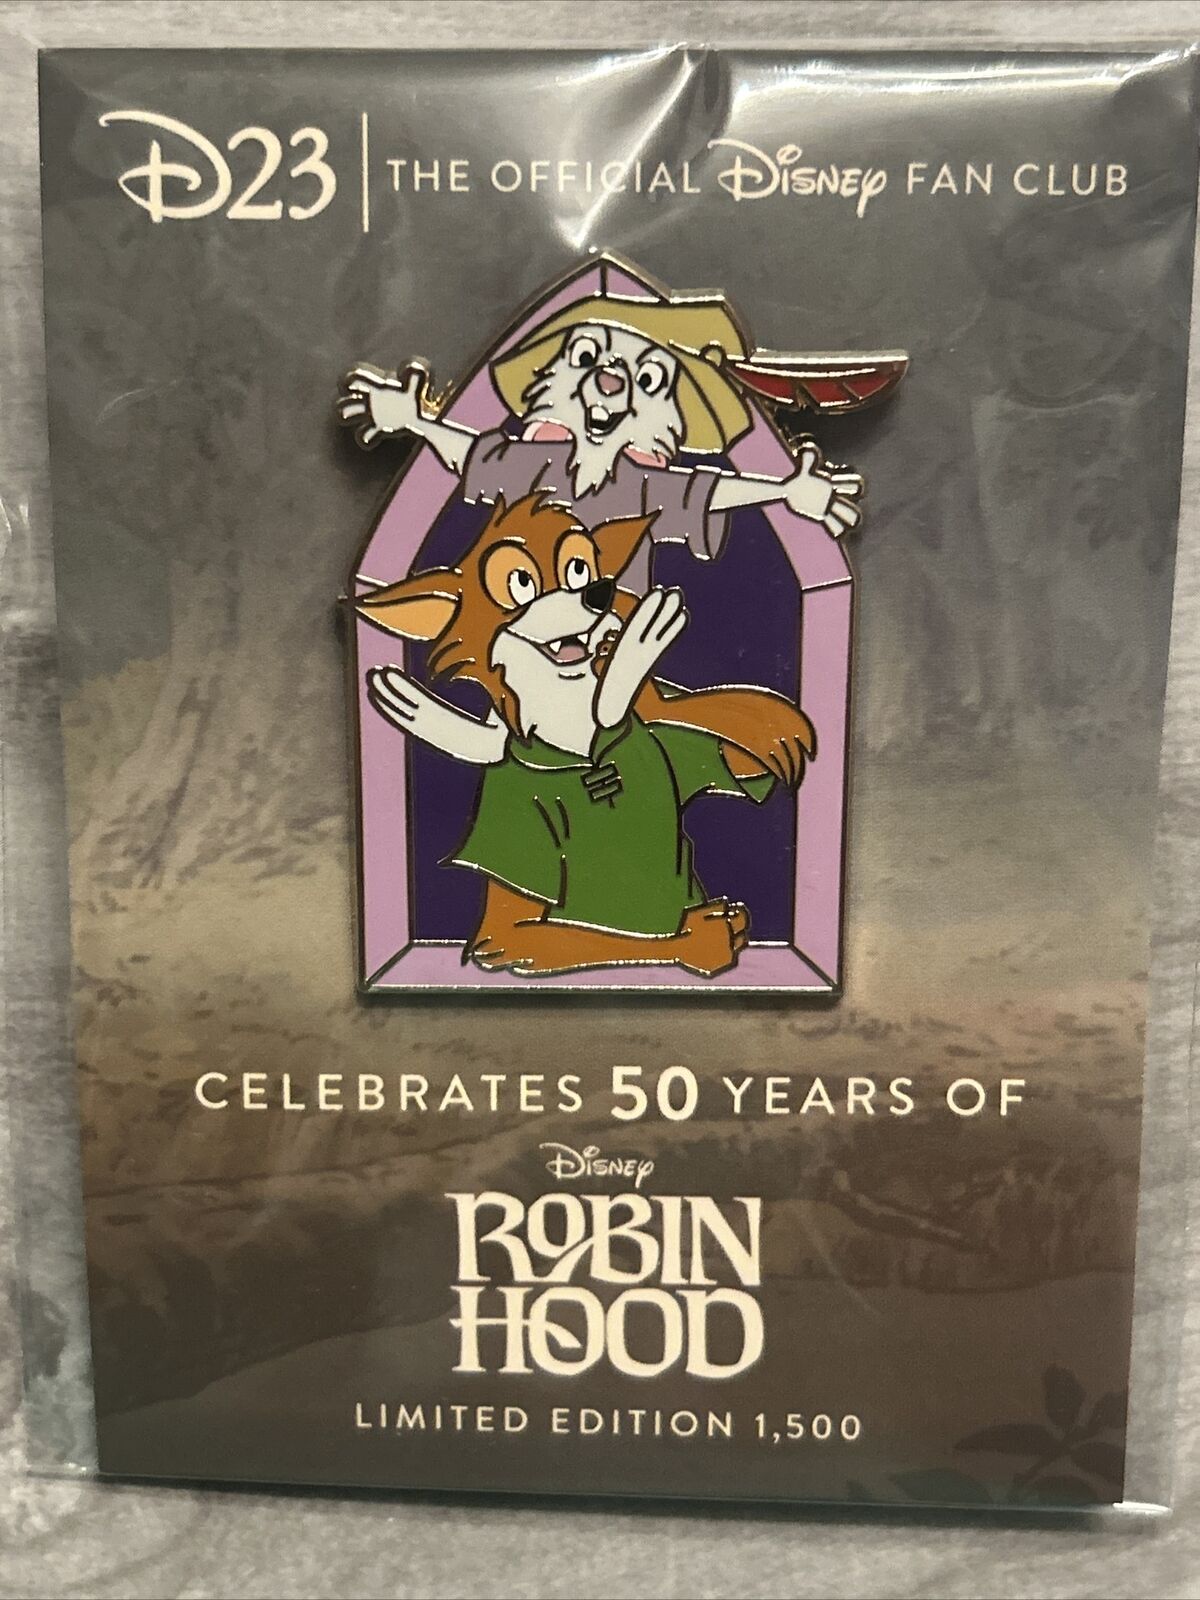 Disney D23 Exclusive Robin Hood 50th Anniversary Pin Limited Edition 1500 - NEW